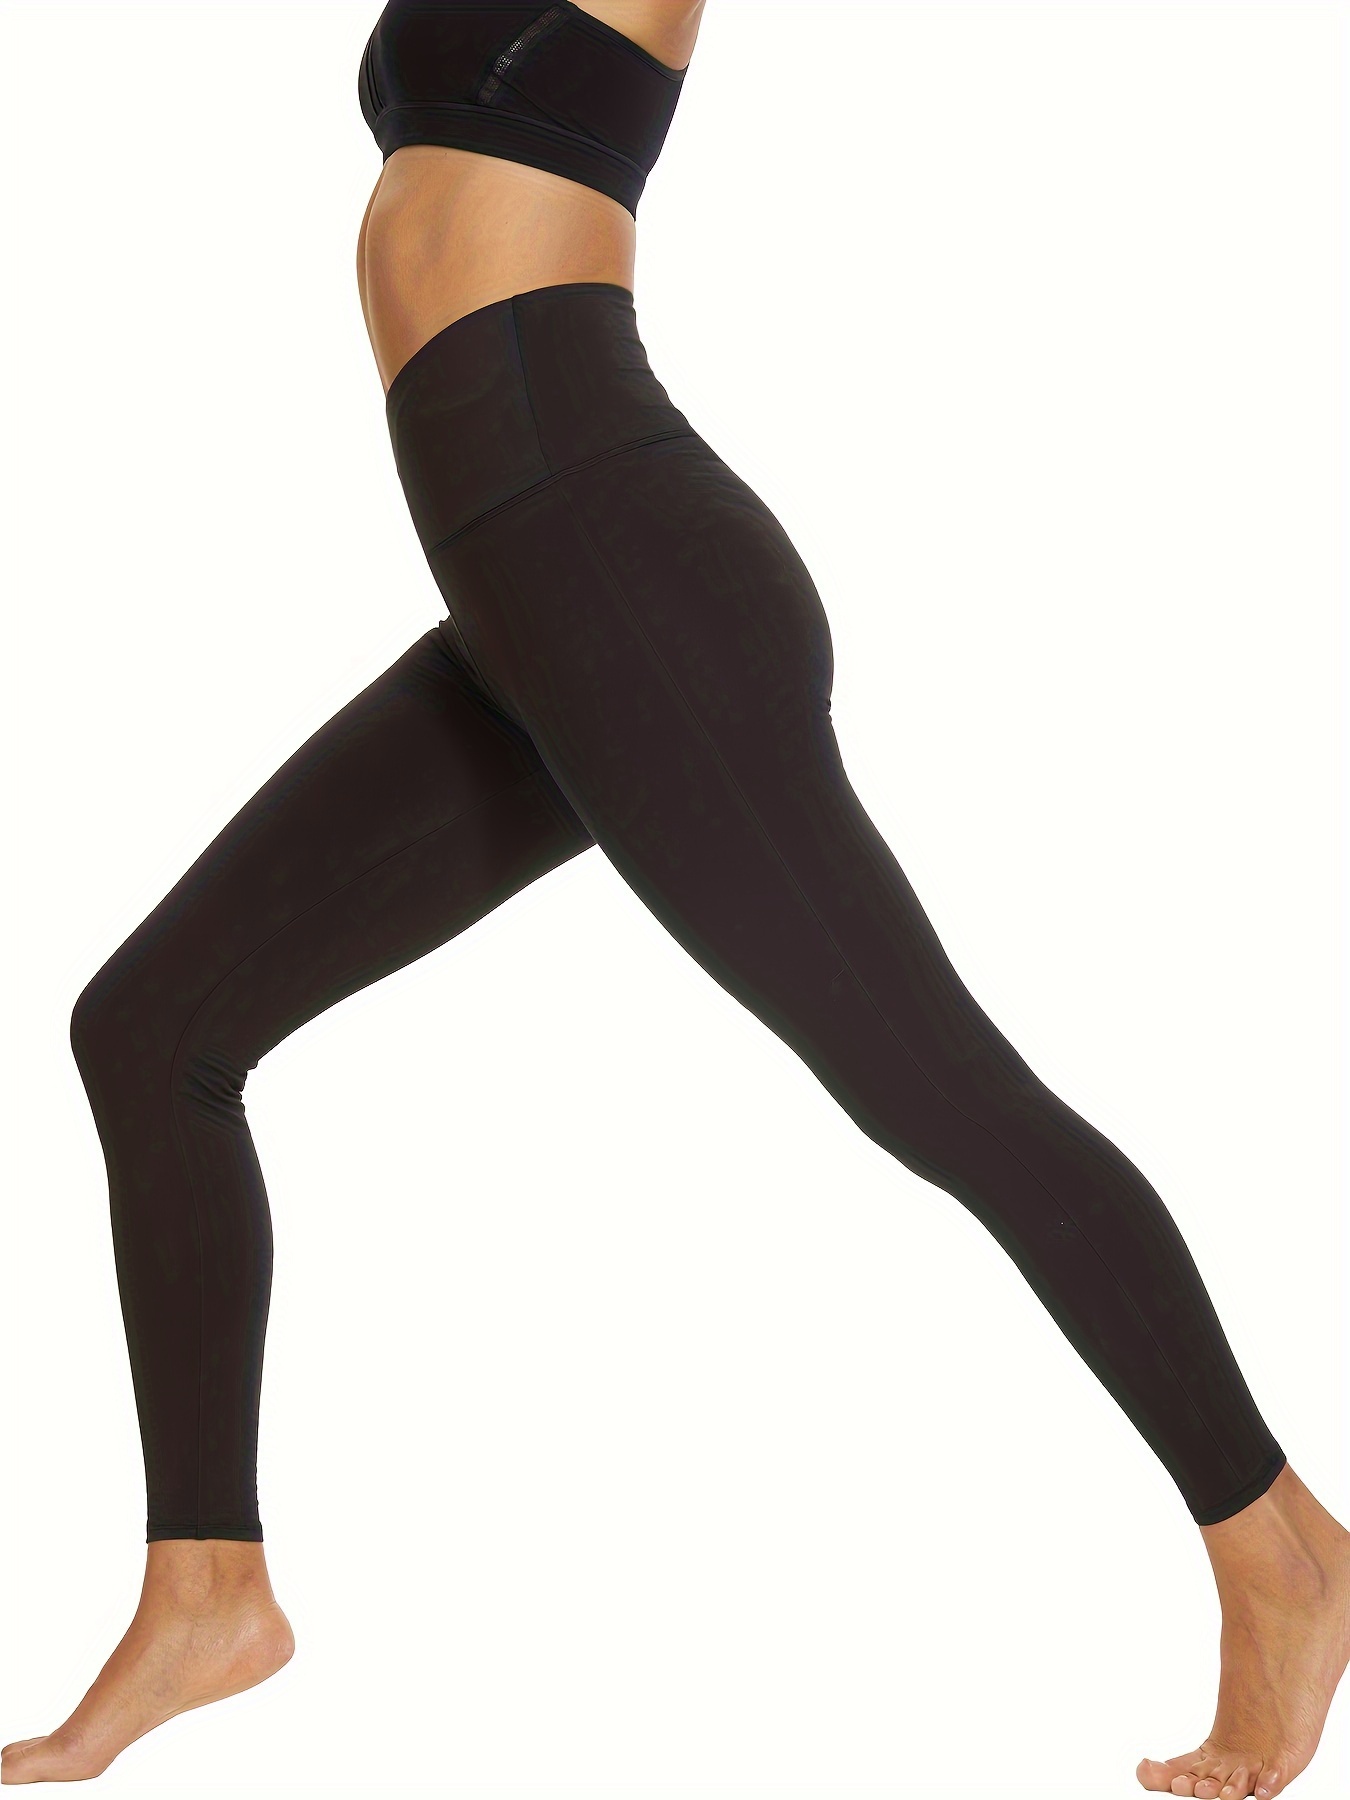  Leggings For Women Tummy Control-High Waisted Non See  Through Black Soft Workout Yoga Pants